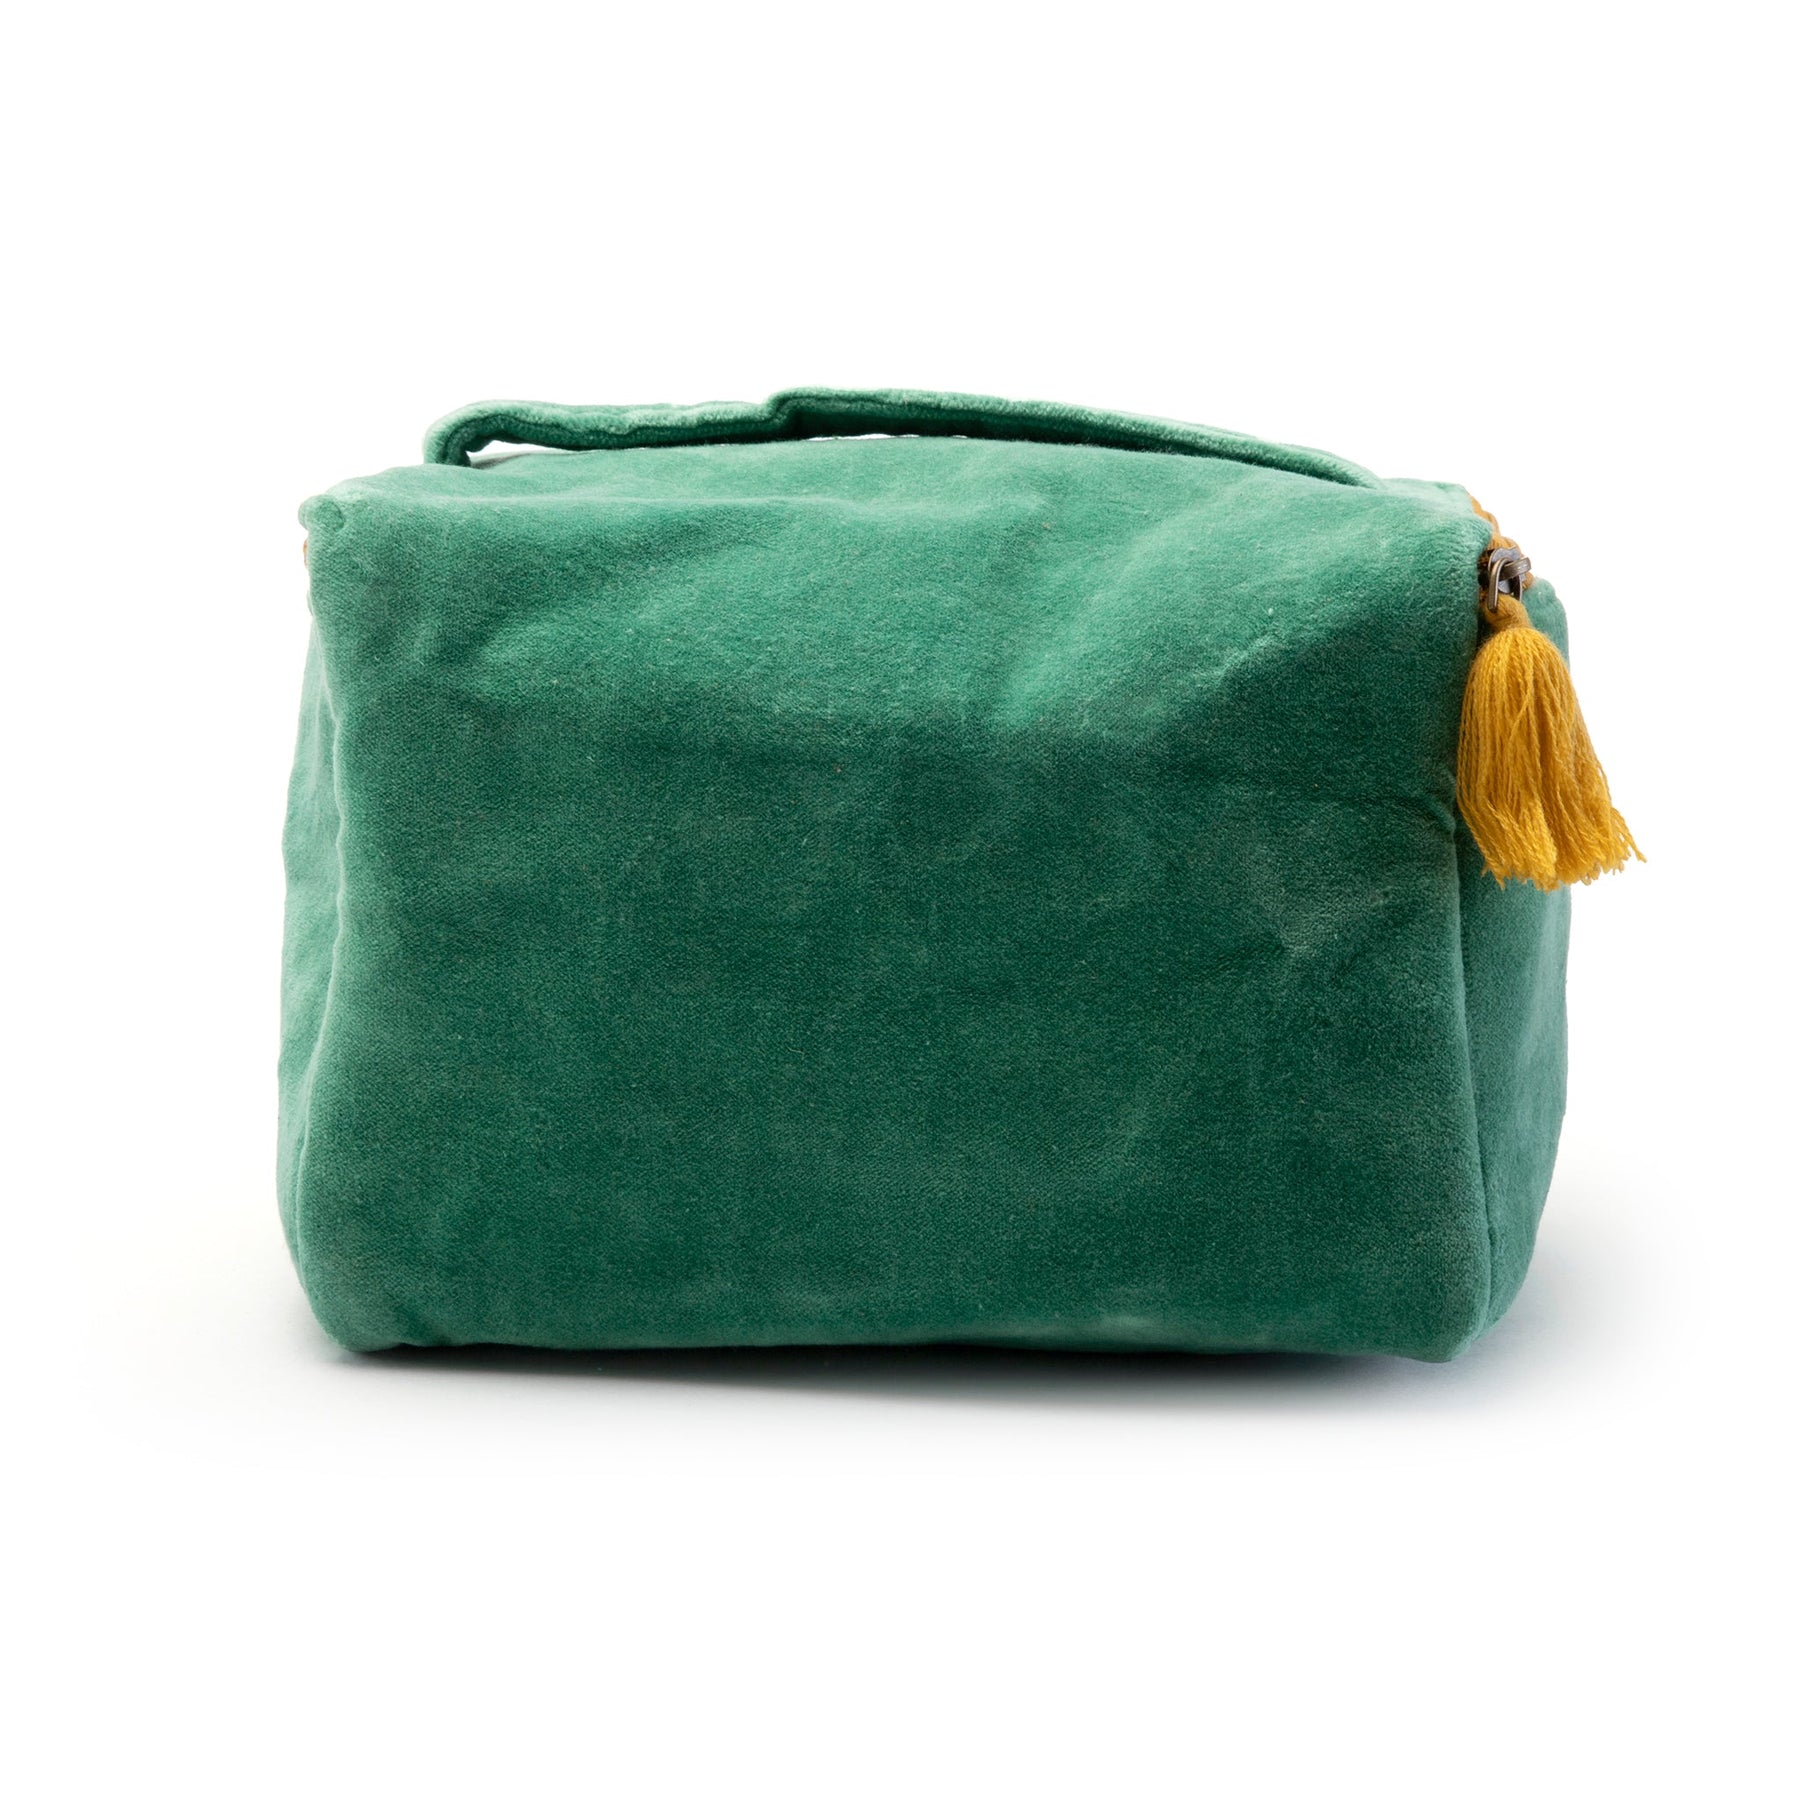 Embroidered Cosmetic Bag-Green Floral